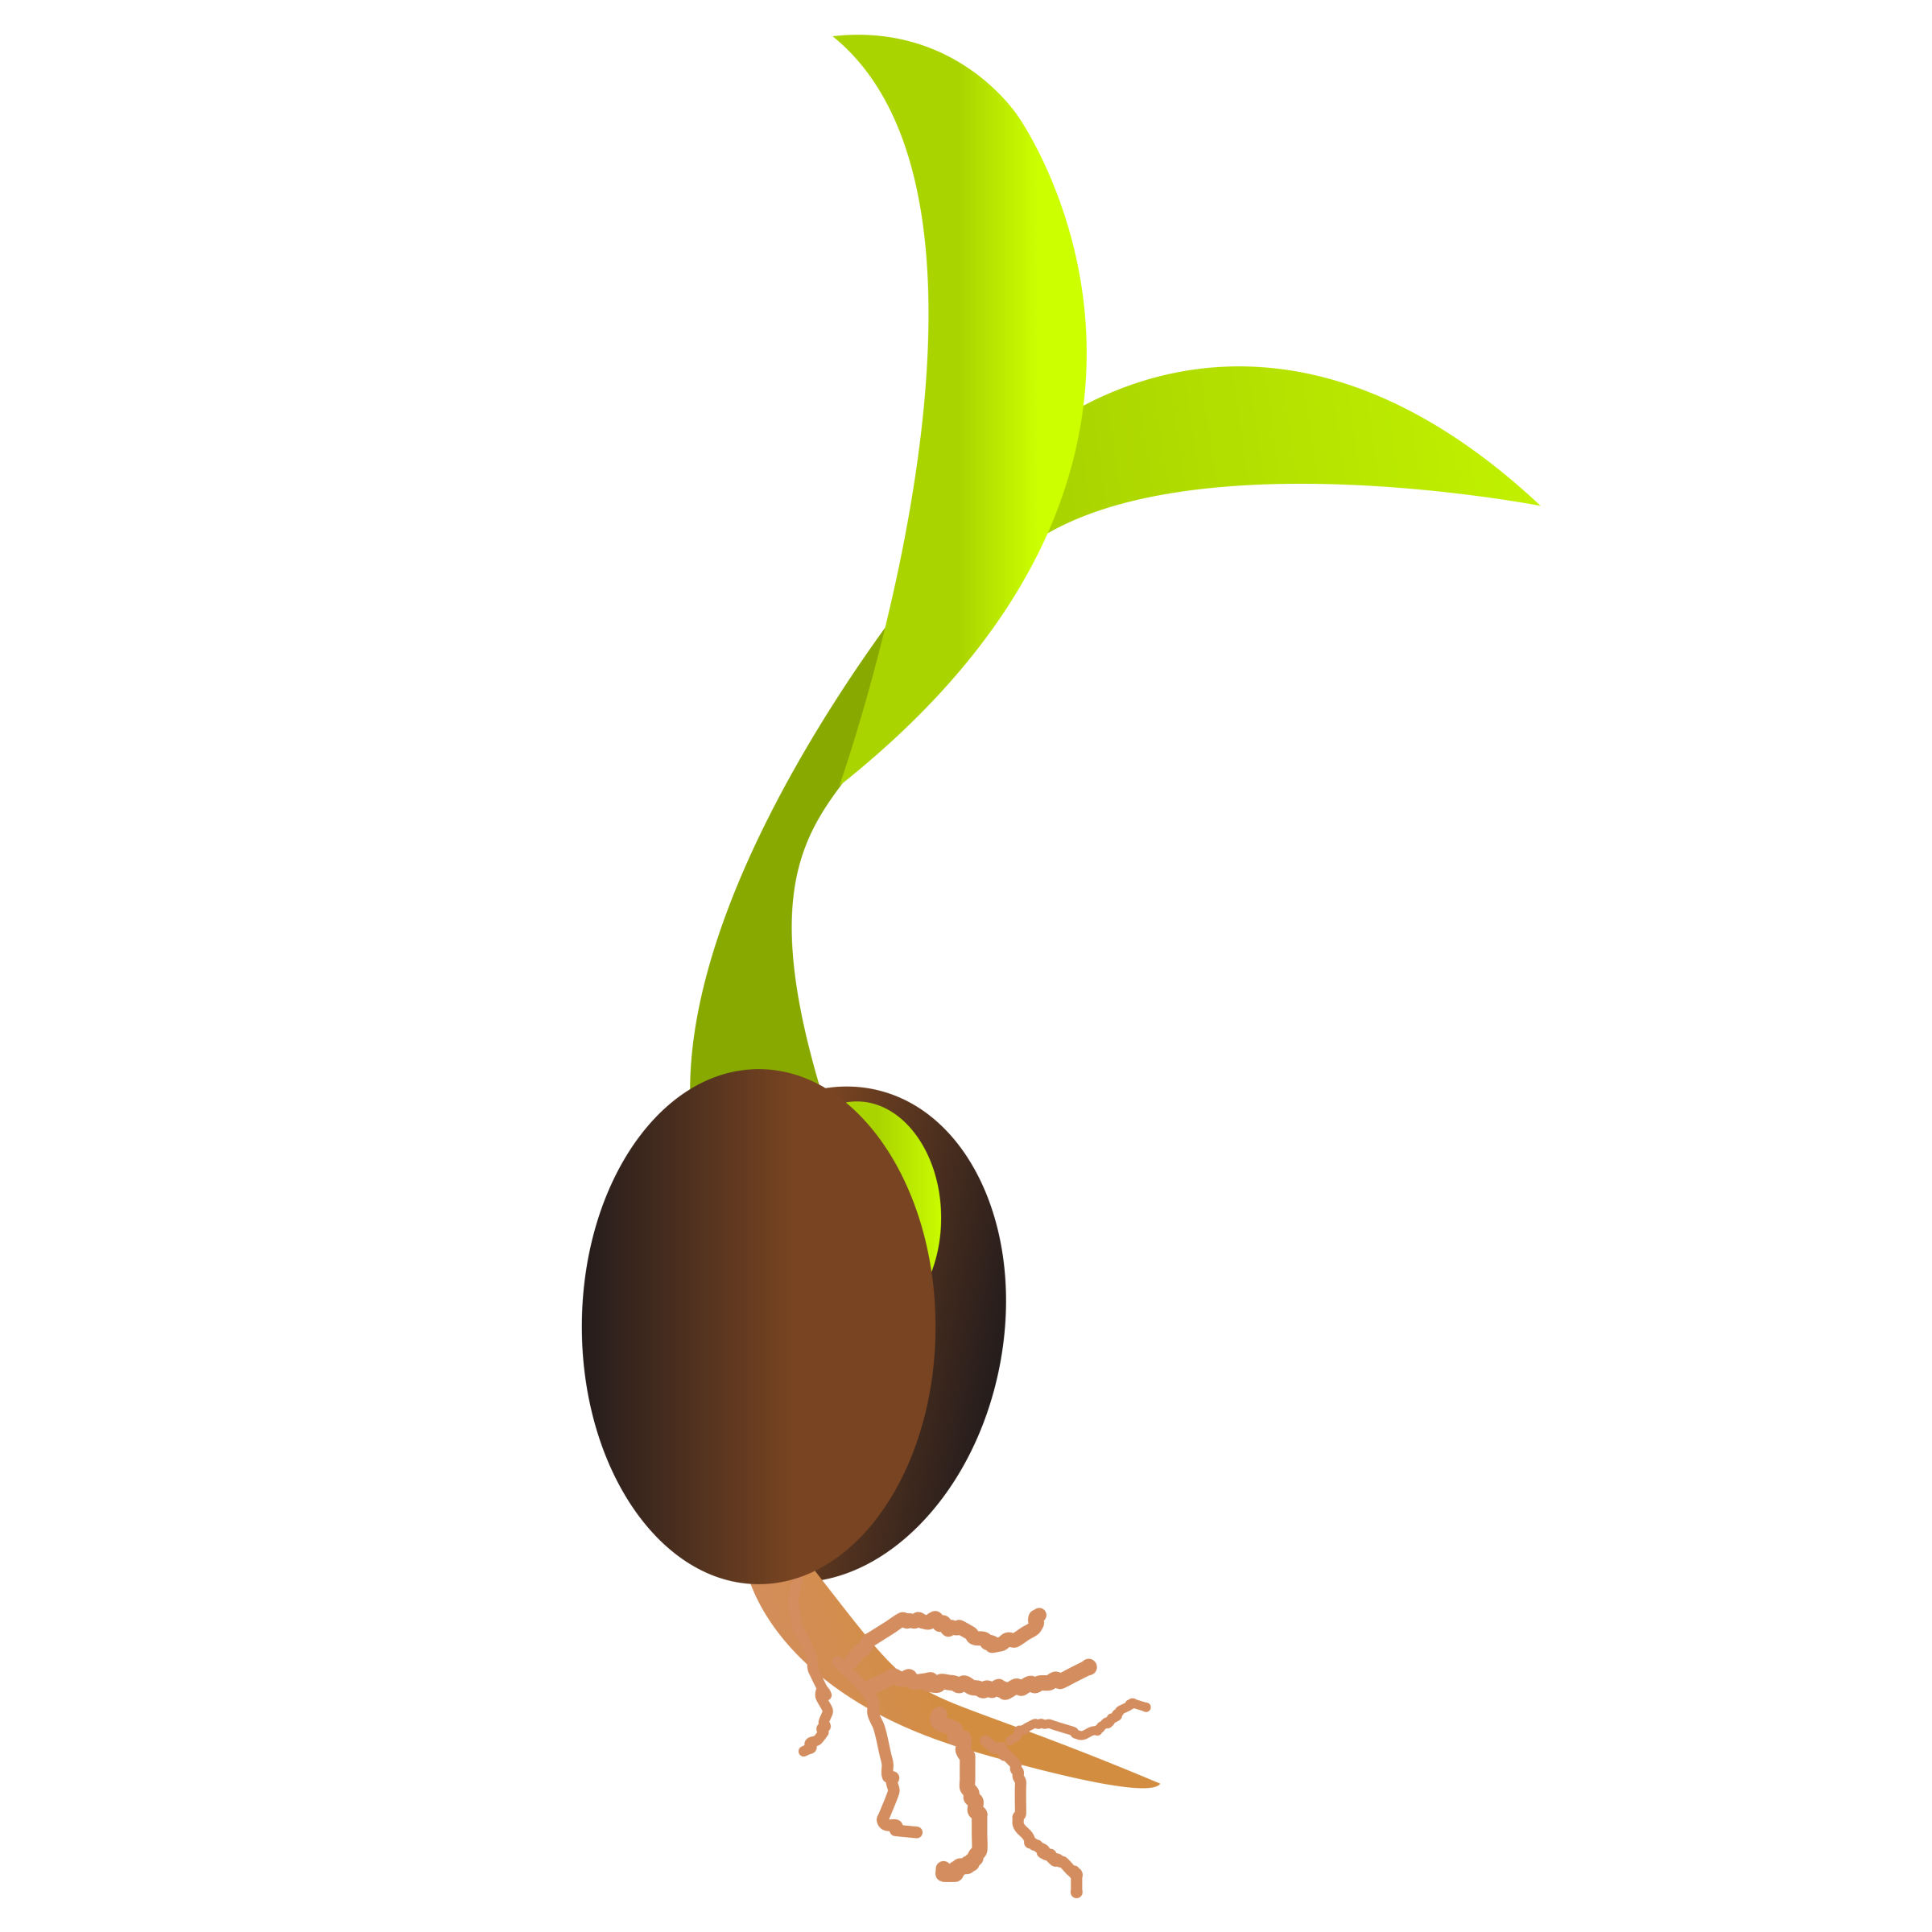 Seed PNG Transparent Images | PNG All